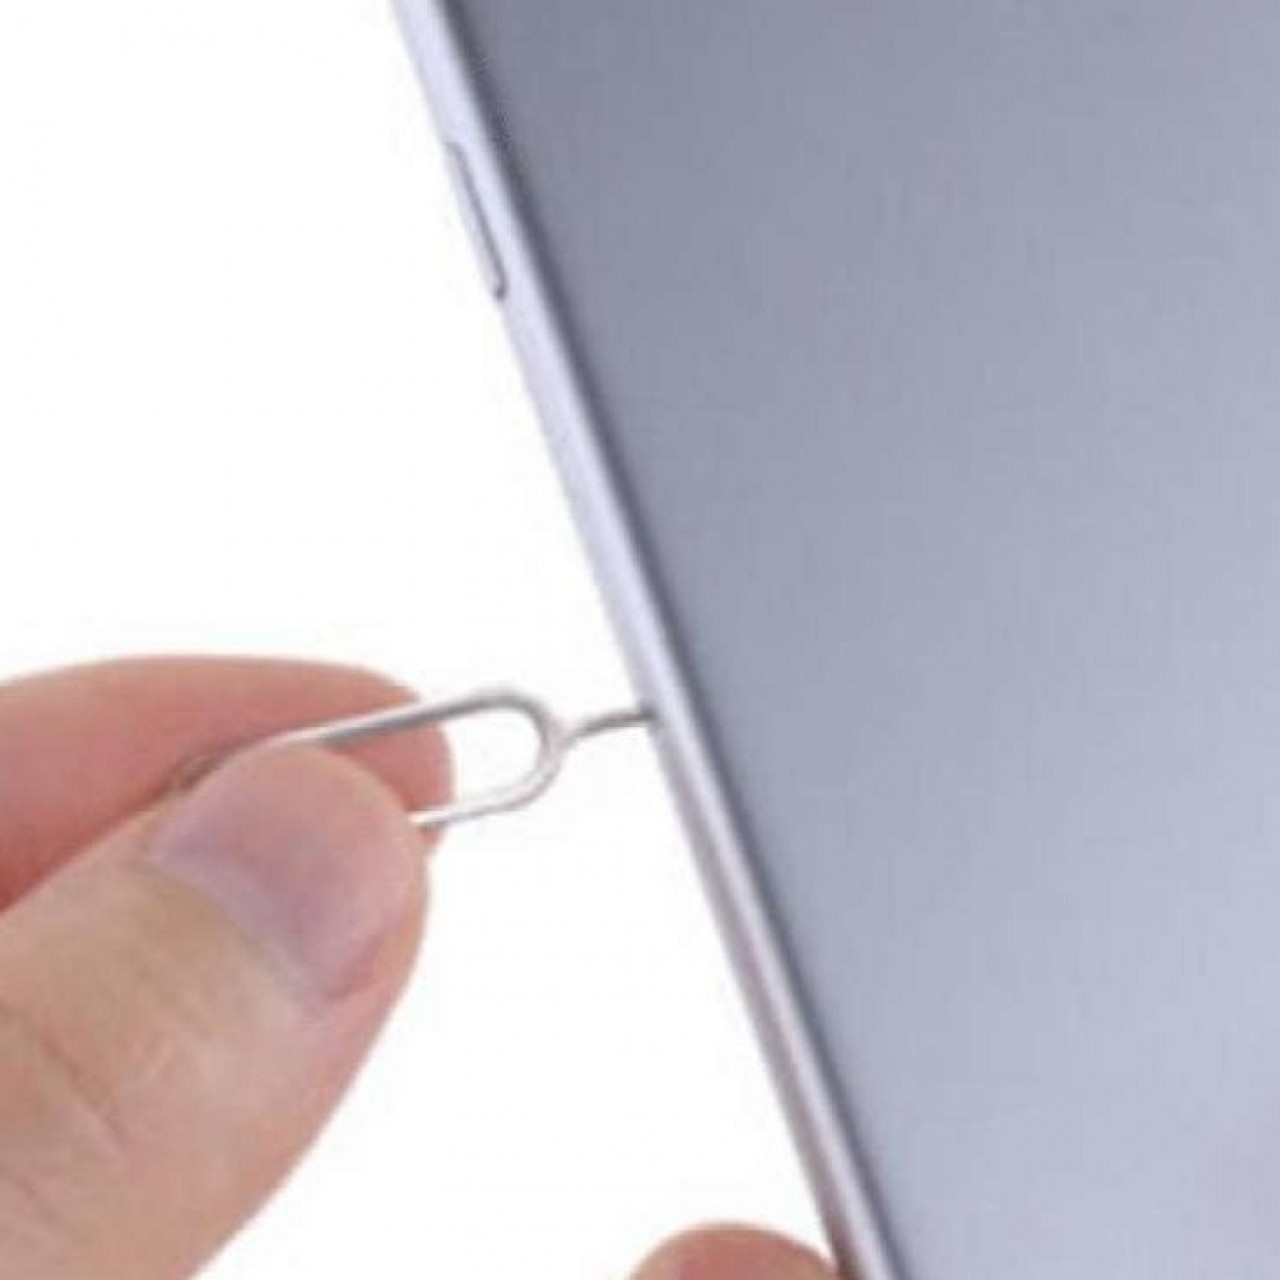 Sim card eject pin Iphone, Android